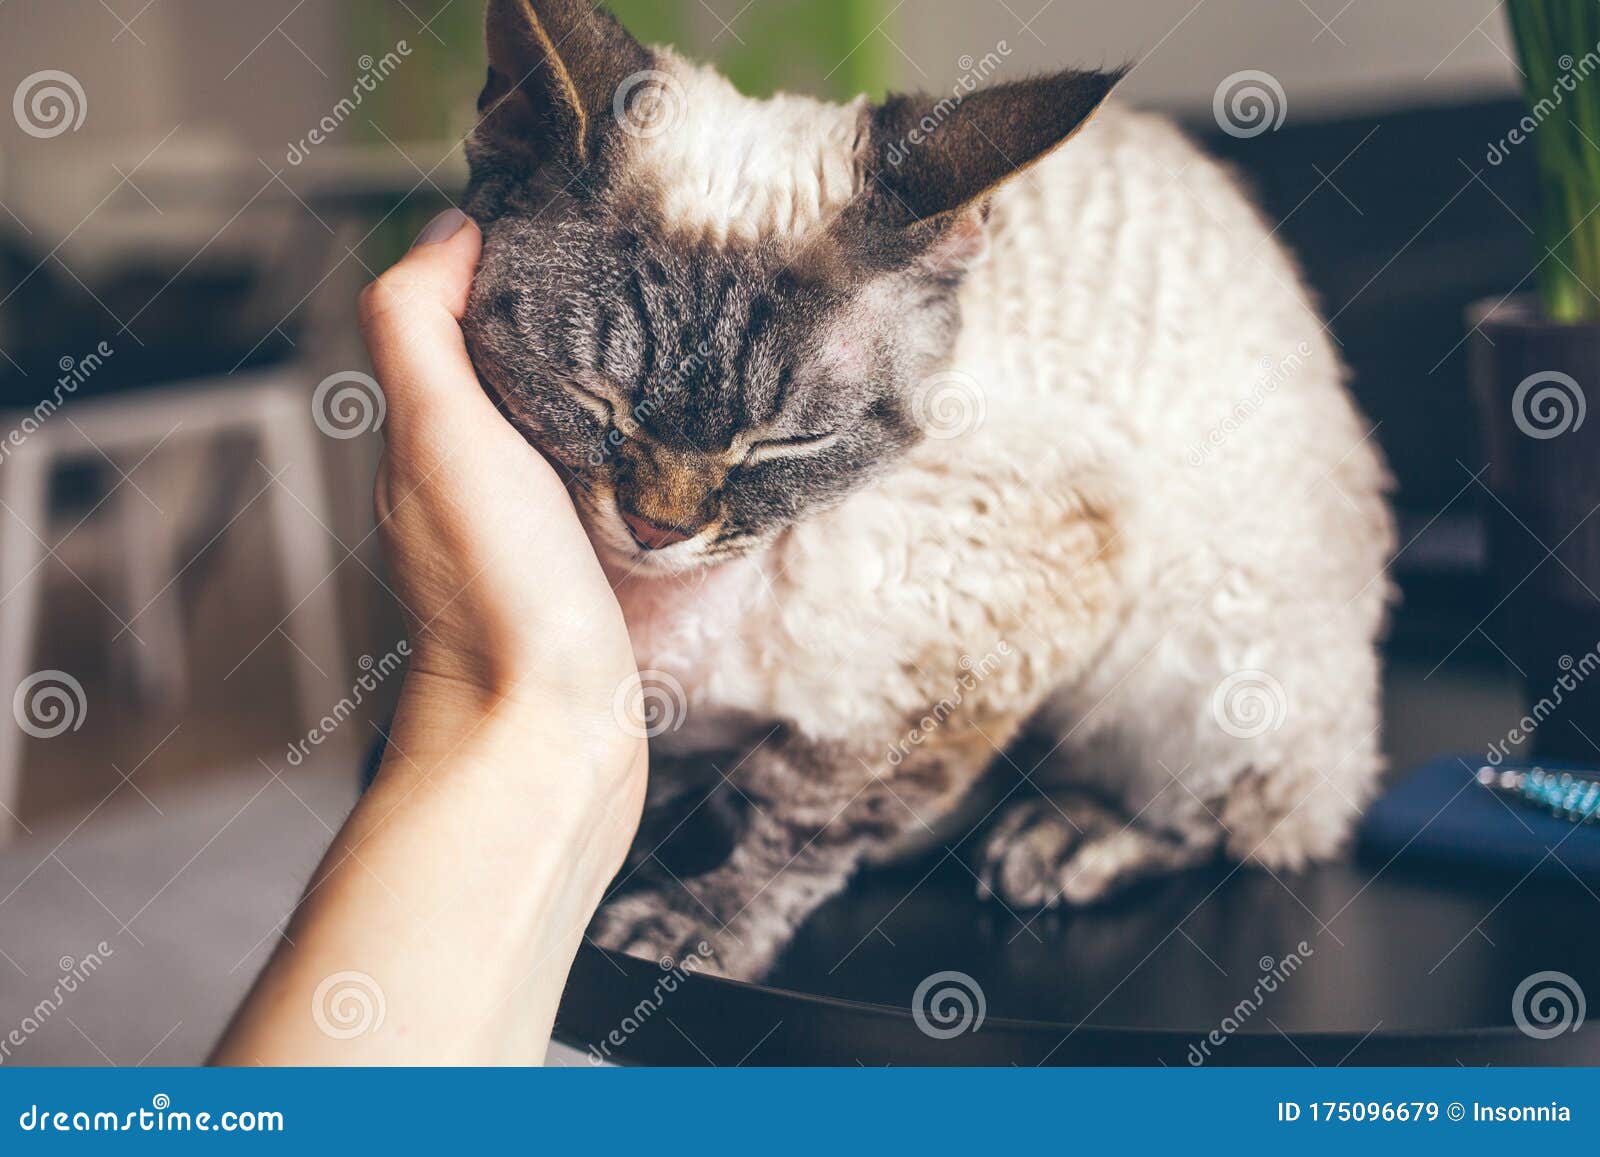 close up of a woman hand cuddling cute devon rex cat. cat is feeling relaxed, happy and is purring. love and tenderness mood.